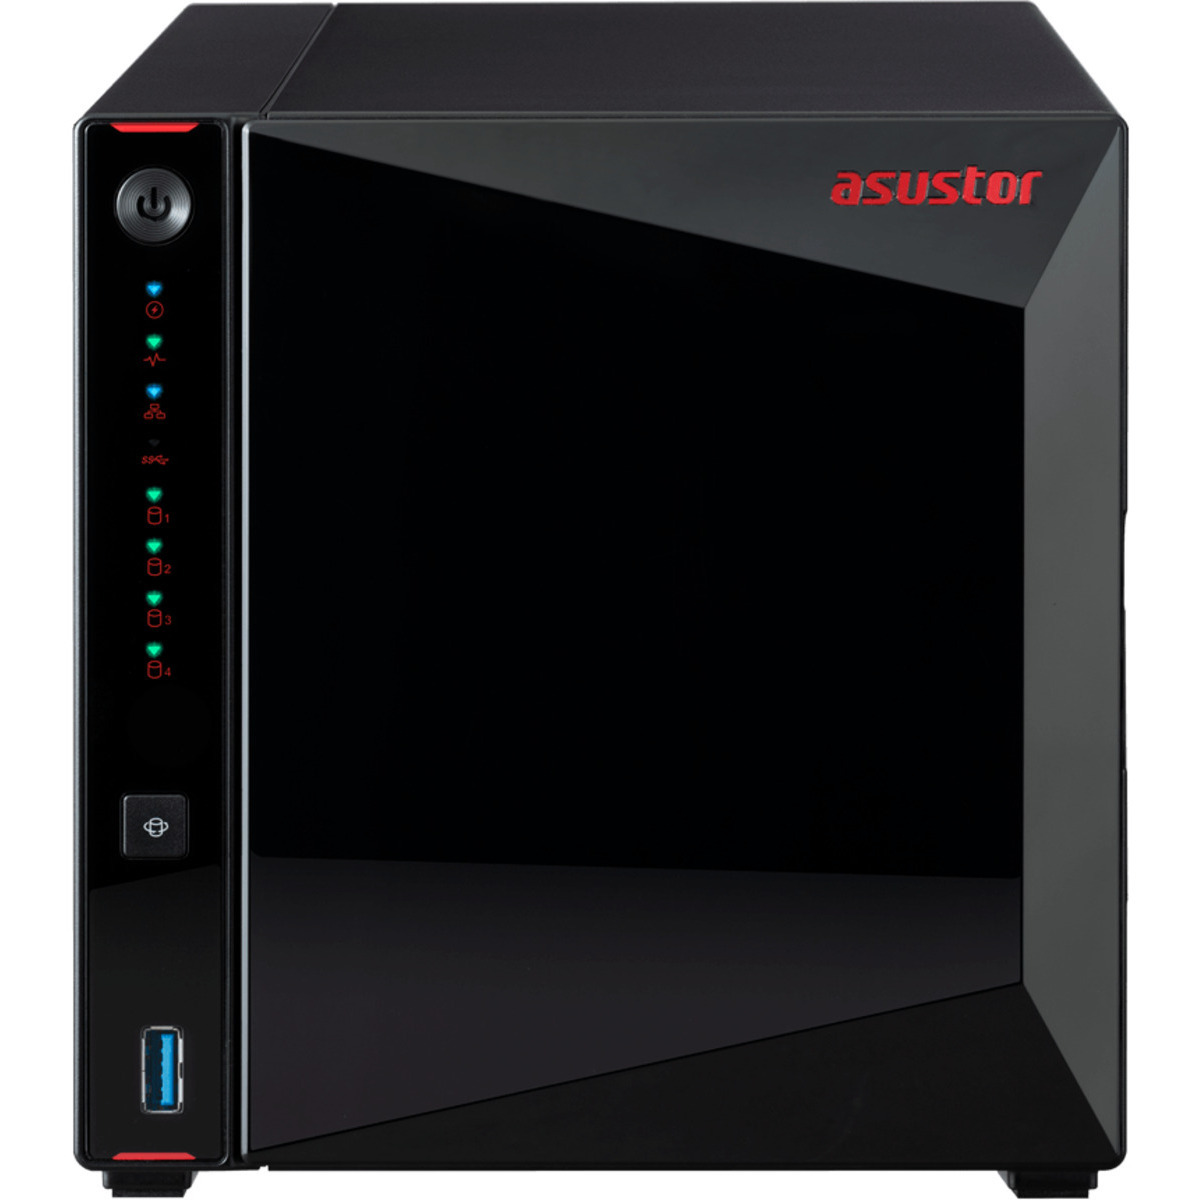 ASUSTOR AS5304T Nimbustor 24tb 4-Bay Desktop Multimedia / Power User / Business NAS - Network Attached Storage Device 4x6tb Western Digital Red WD60EFAX 3.5 5400rpm SATA 6Gb/s HDD NAS Class Drives Installed - Burn-In Tested - FREE RAM UPGRADE AS5304T Nimbustor